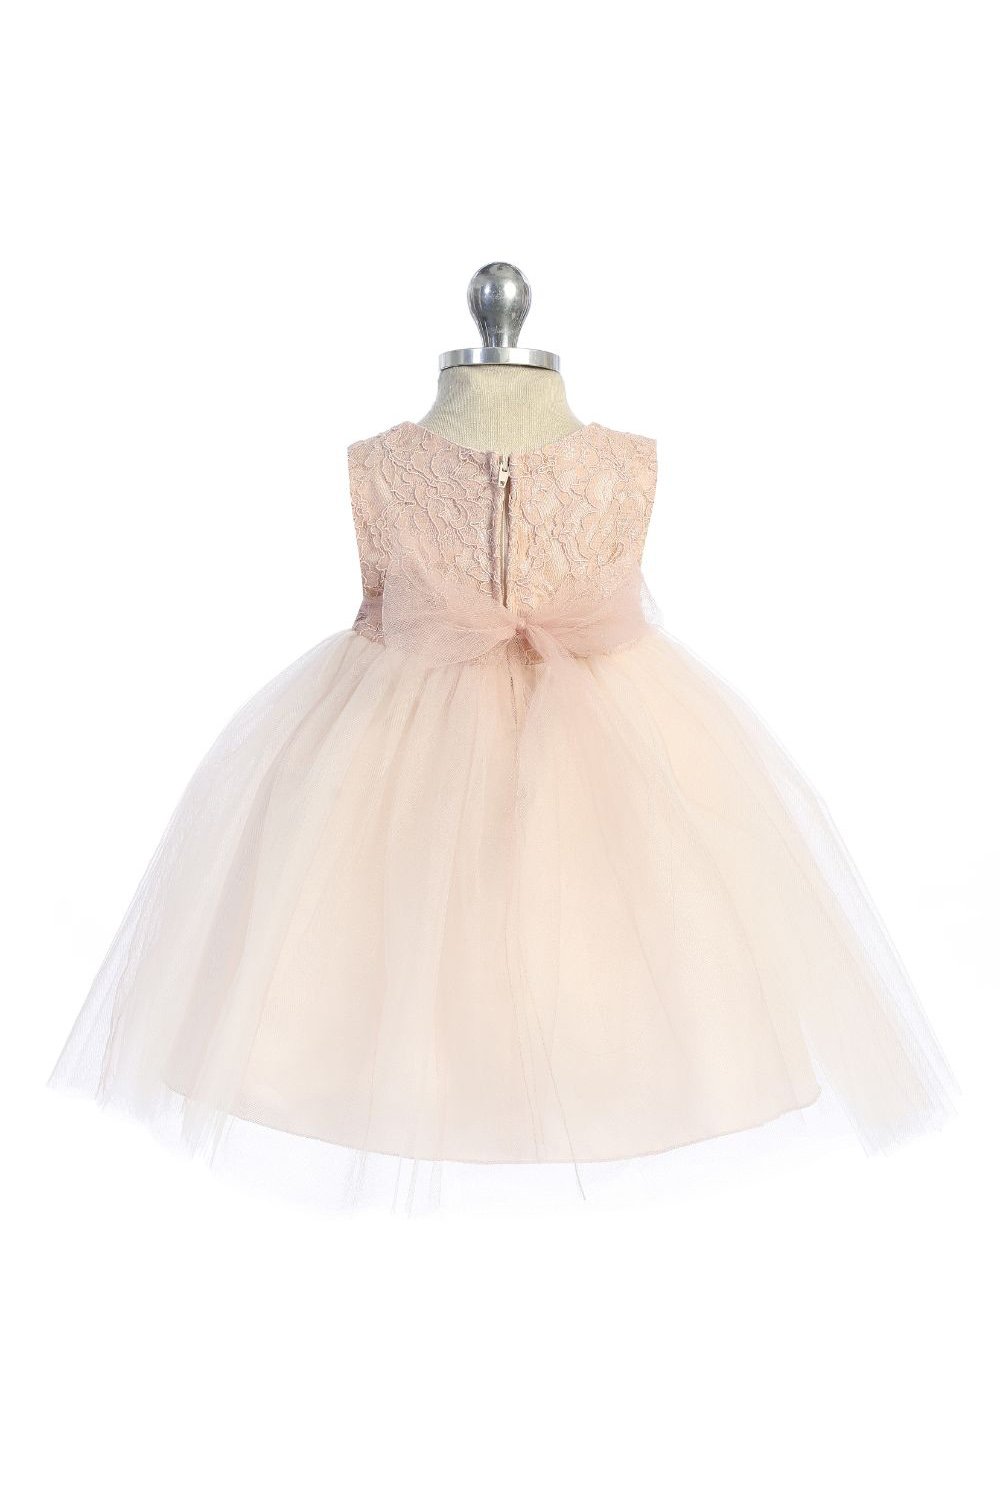 Baby Girl Lace Blush Pink Illusion Party Dress- AS414B Kids Dream